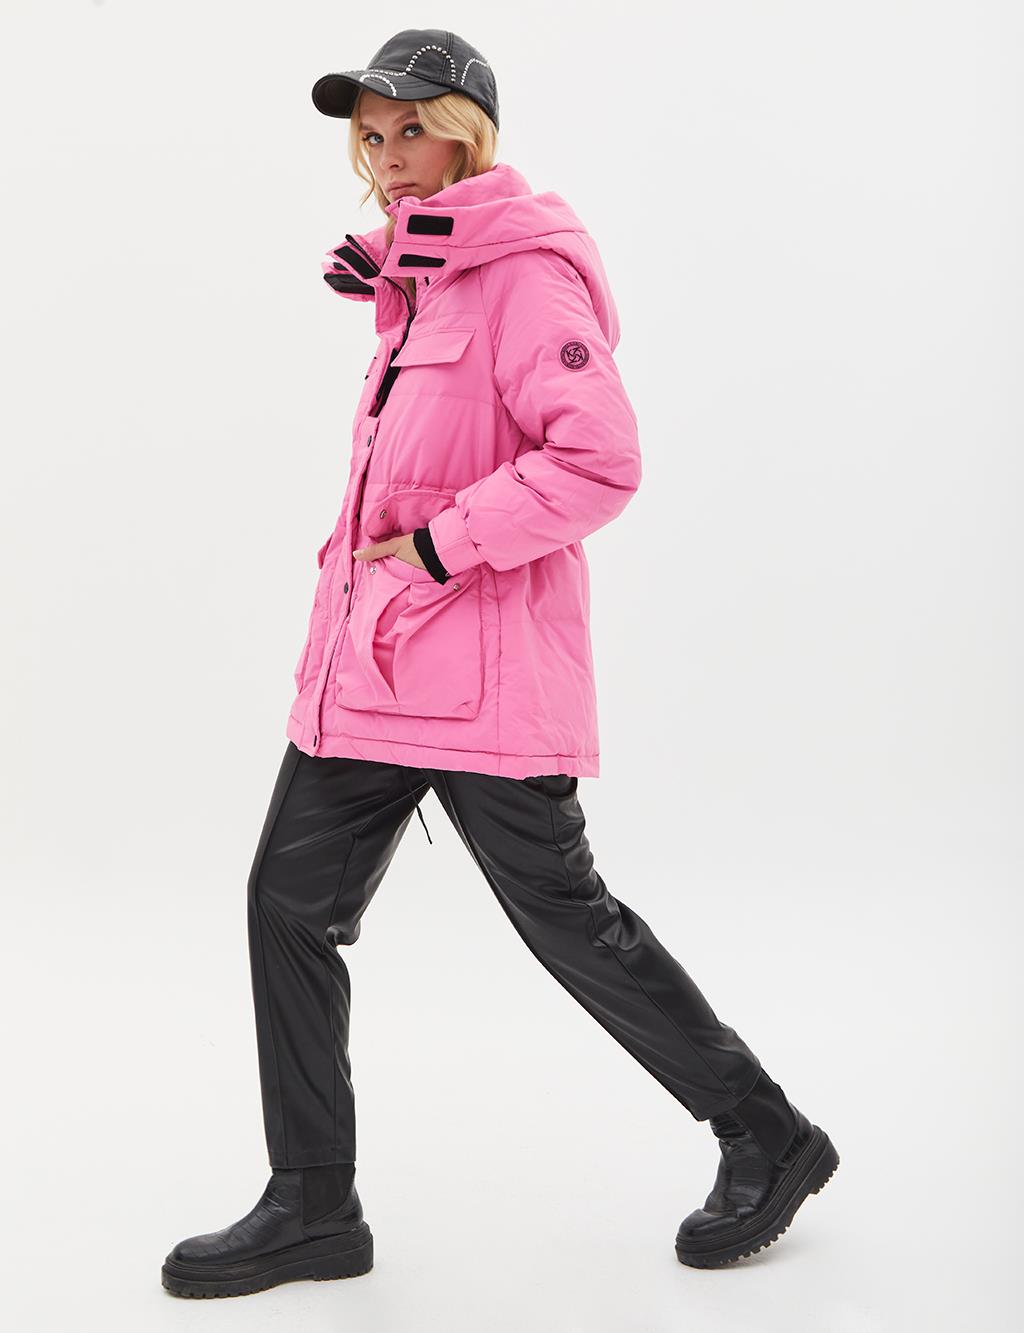 Pocket Detail Stand-up Collar Goose Feather Coat Pink